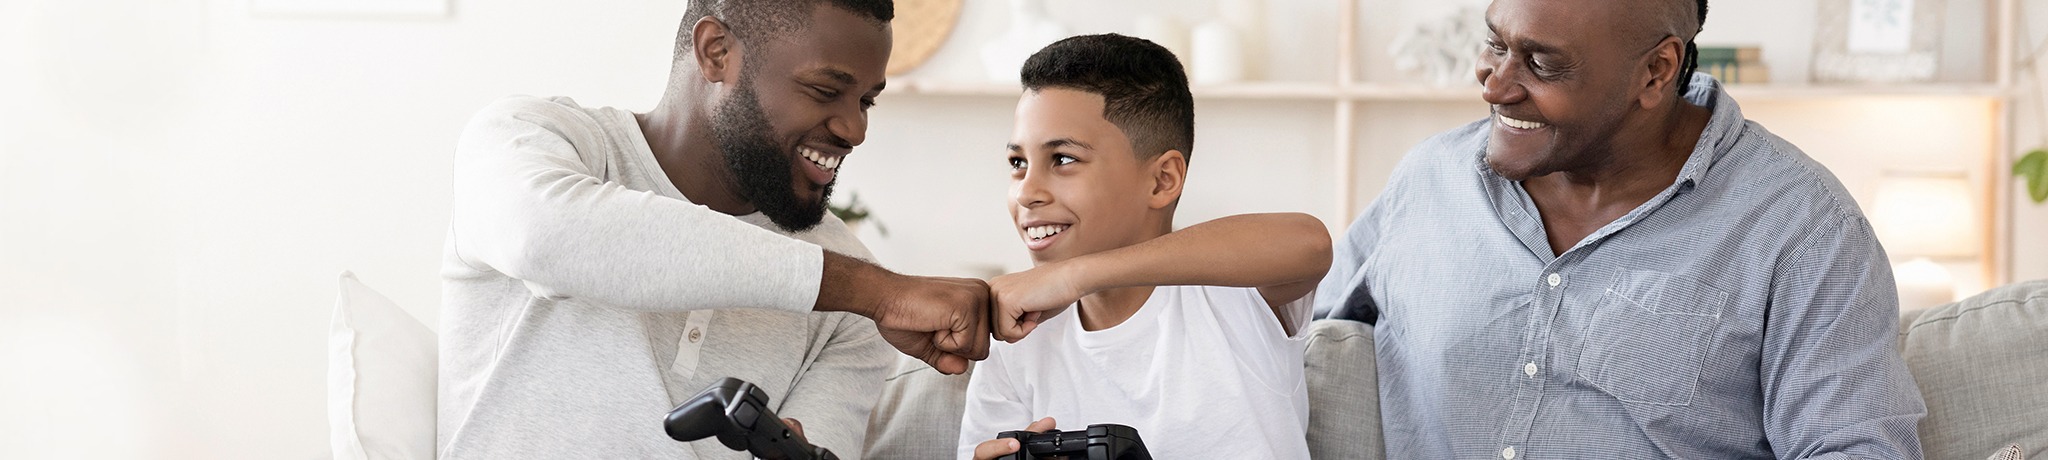 Two men and a boy playing video games bumping fists